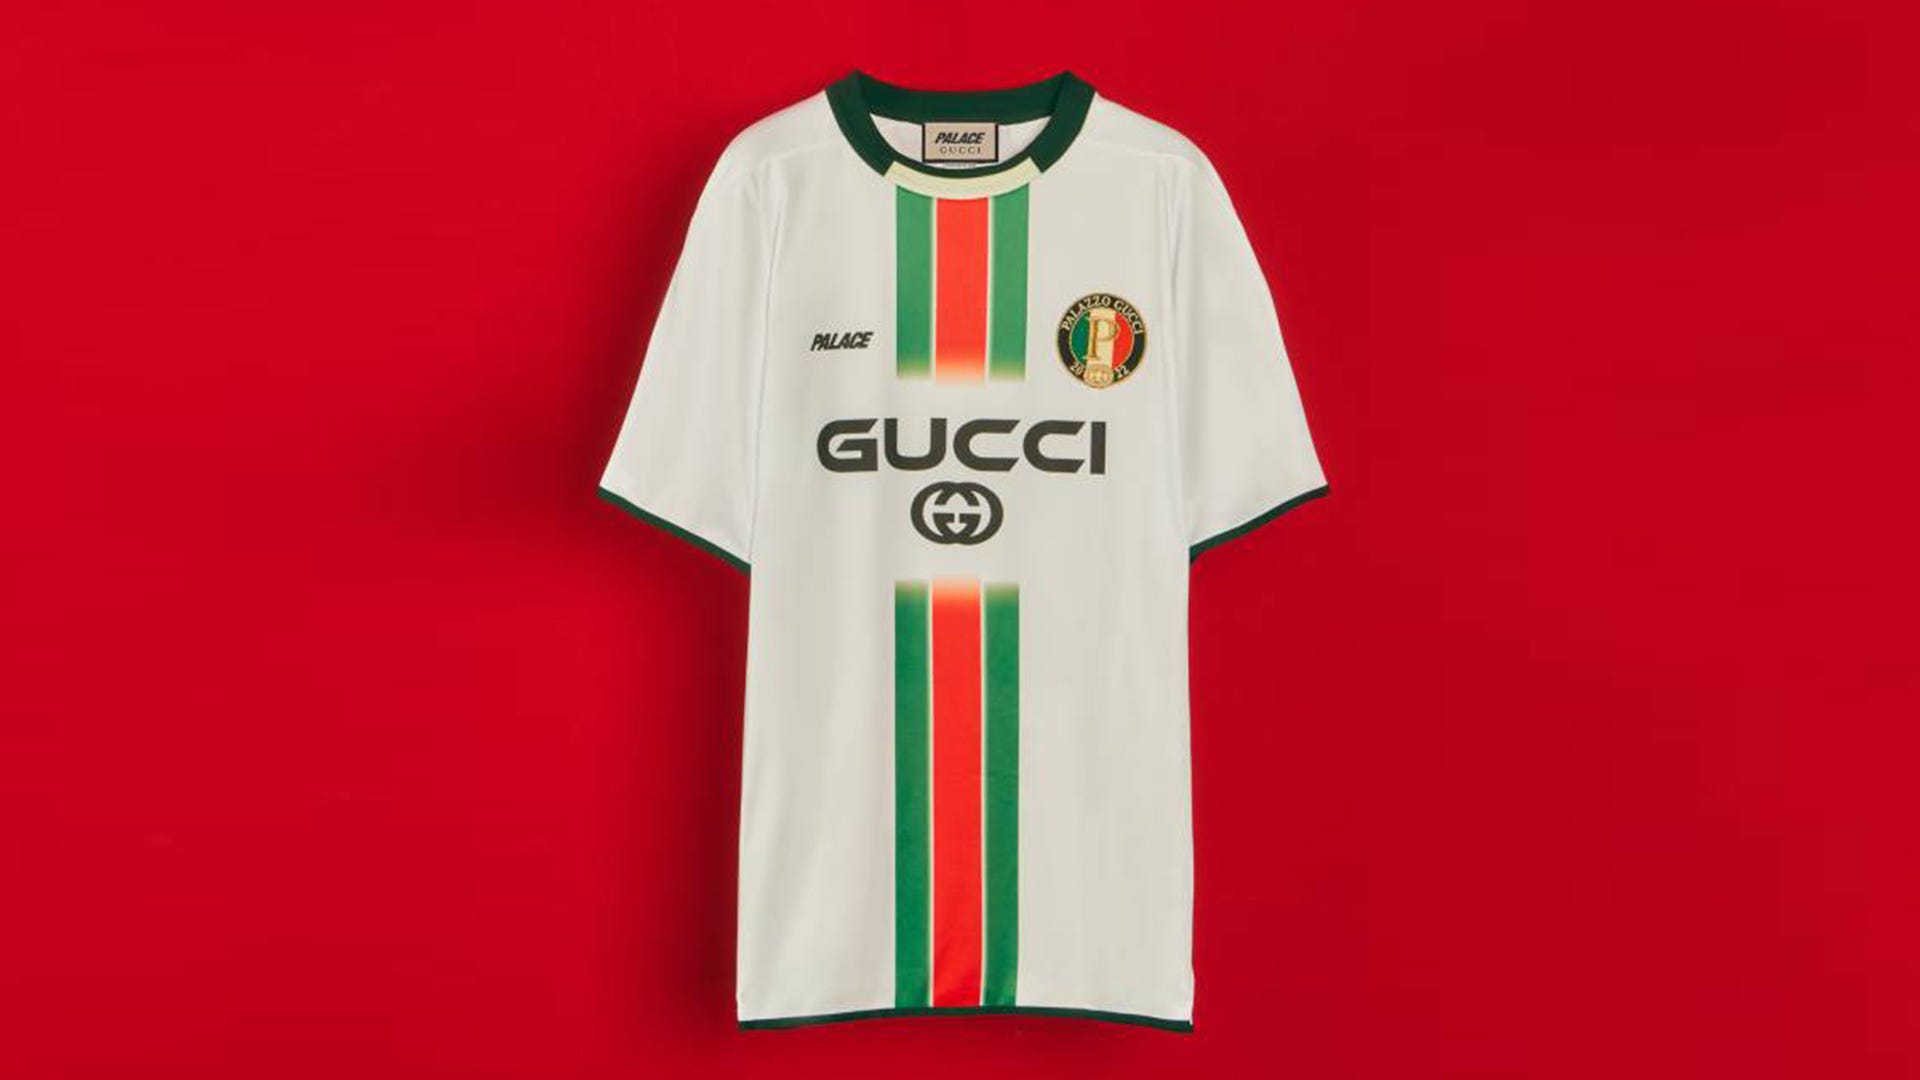 Did Palace Gucci just drop this year's best football shirts? | Goal.com